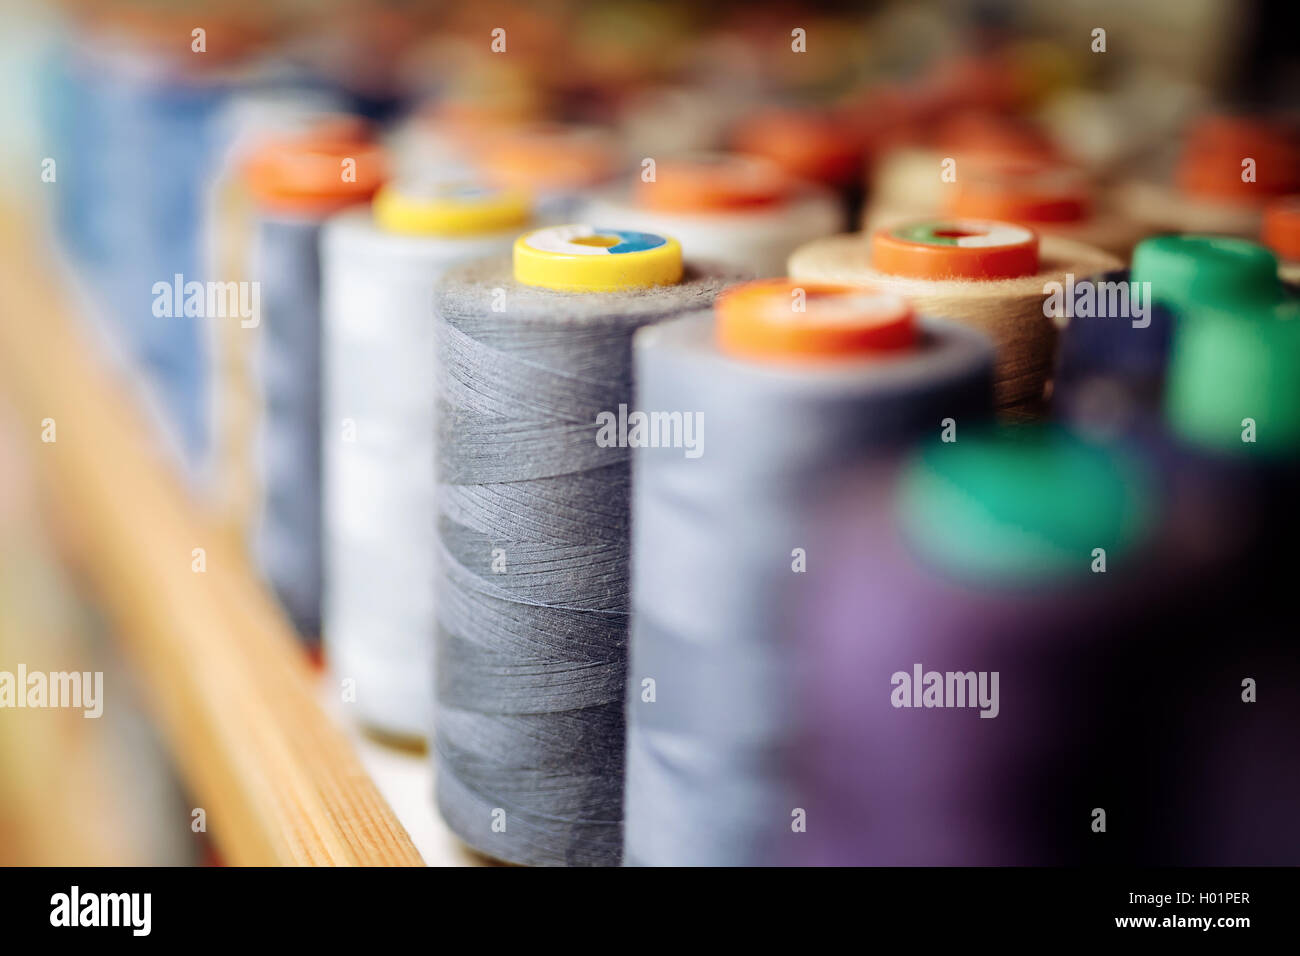 Colorful thread spools used in fabric and textile industry Stock Photo